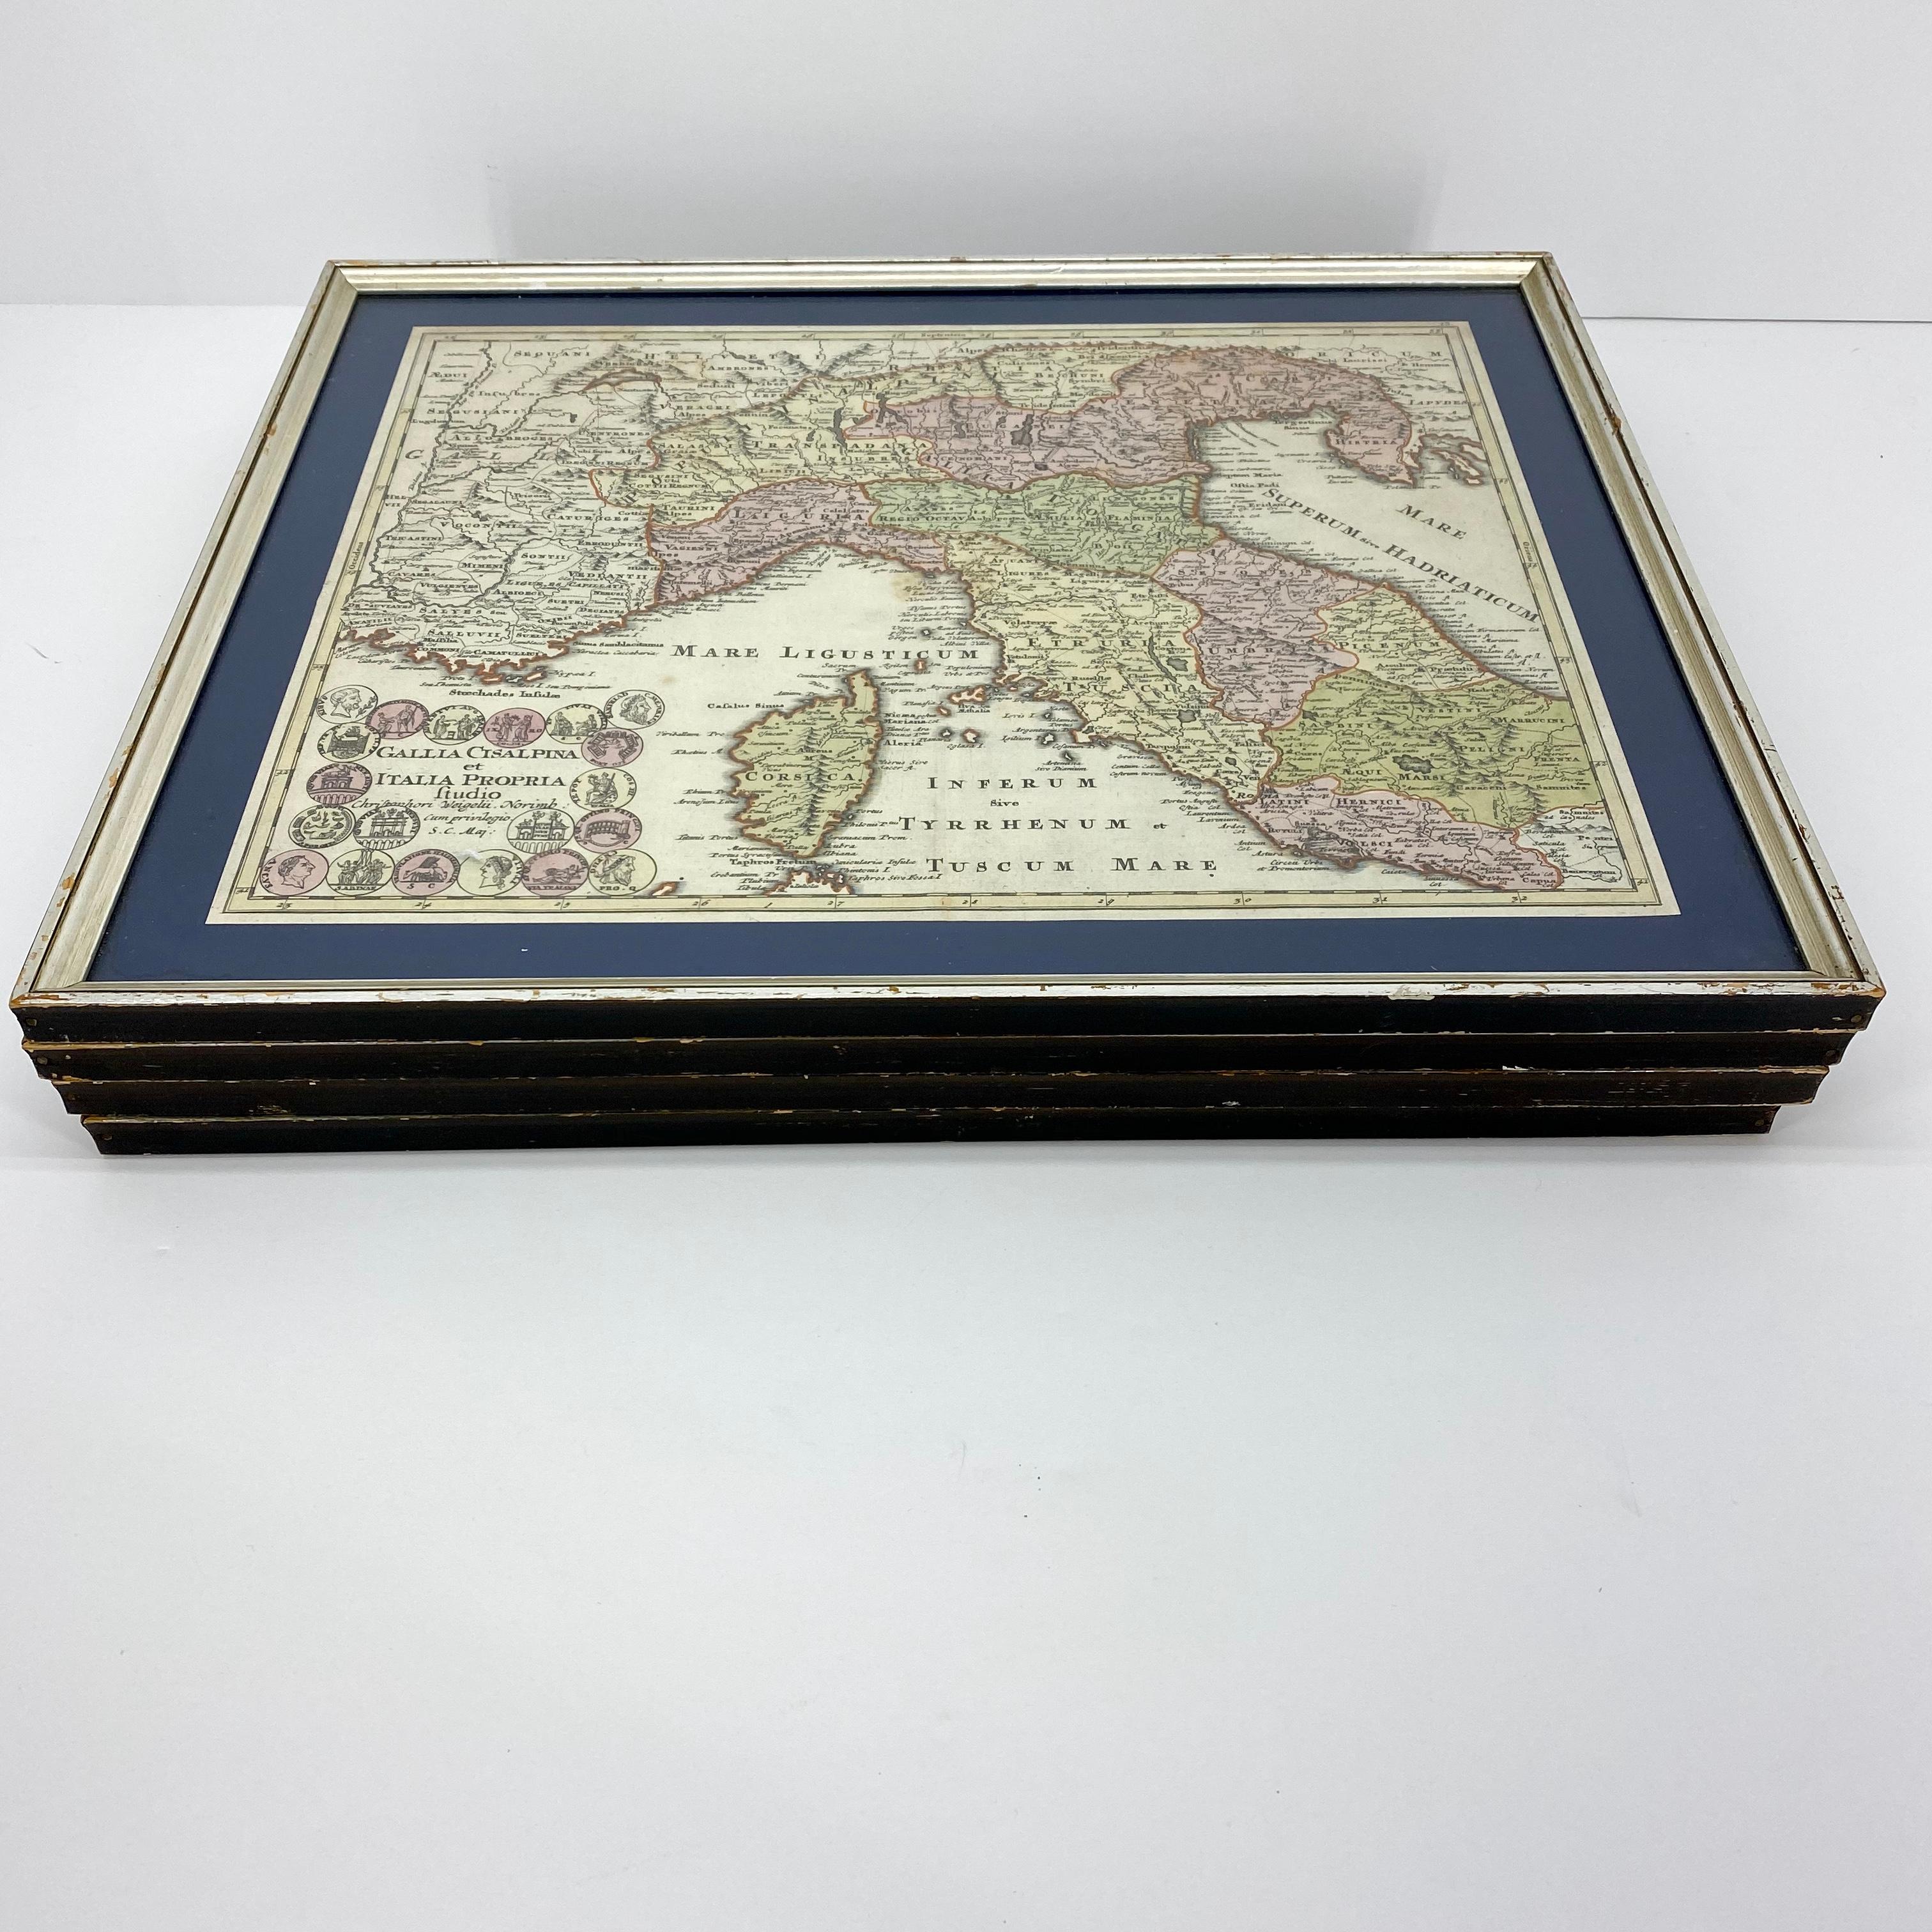 Set Of 4 Silver Gilded Framed Maps Of Italy And Danube In Blue Passe-Partout 9